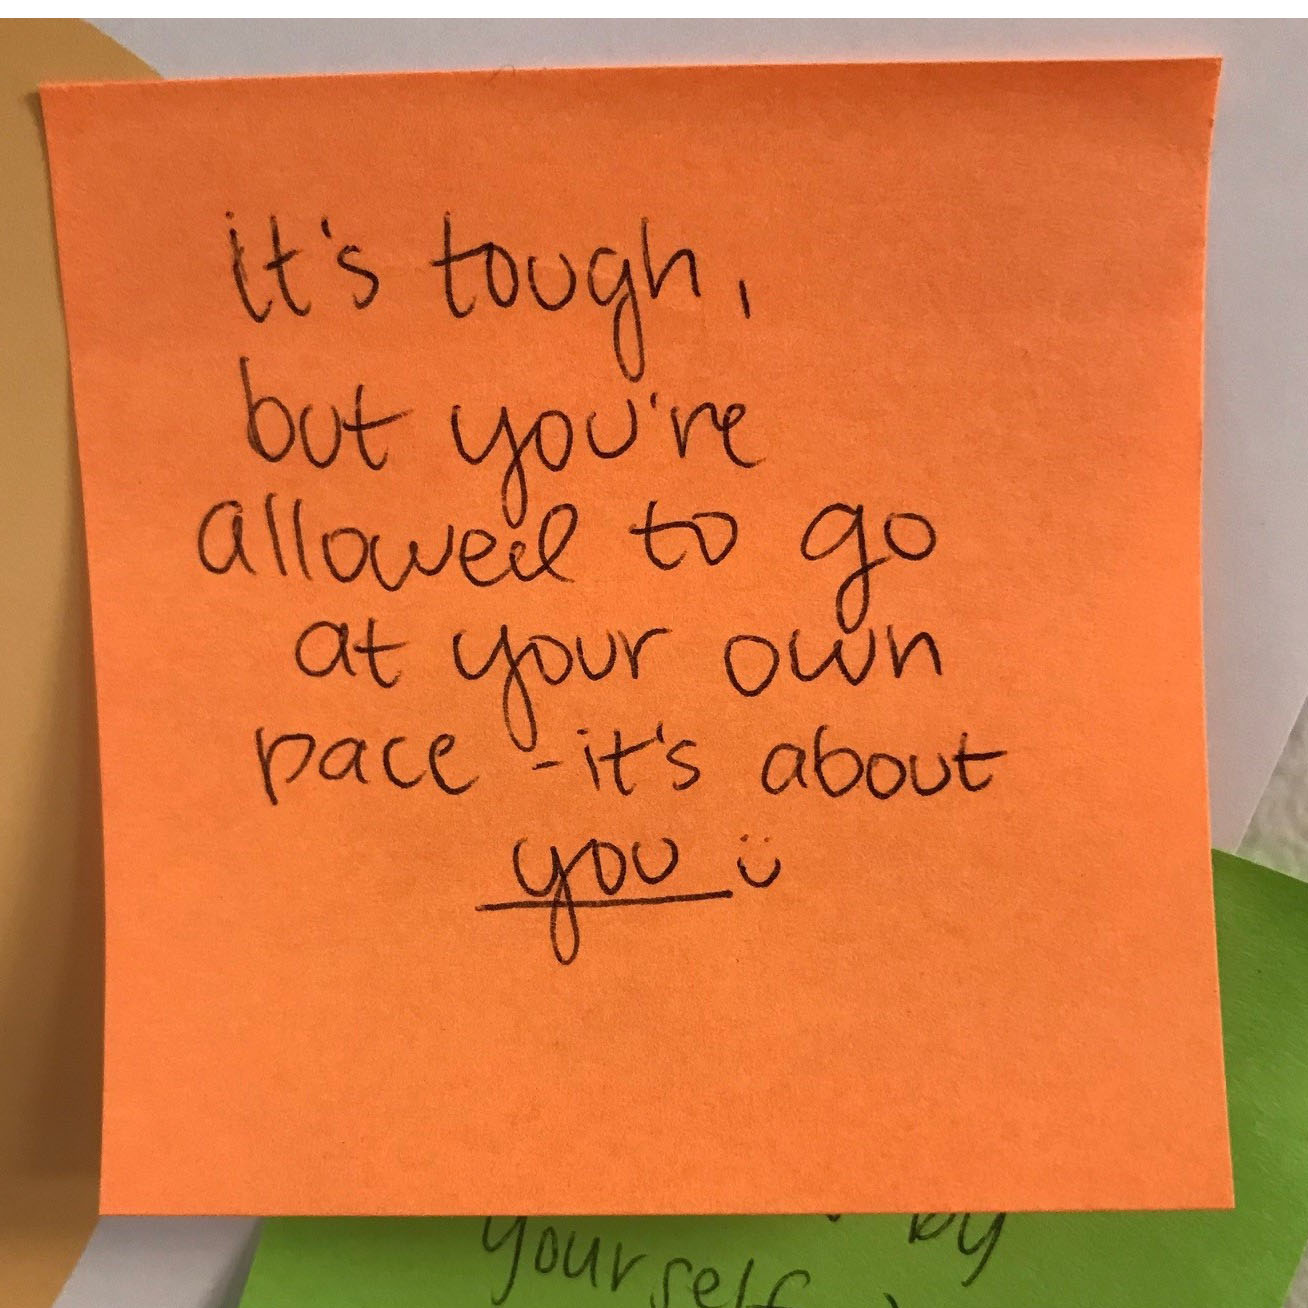 A first-generation college student wrote, "It's tough, but you're allowed to go at your own pace - it's about you :)"